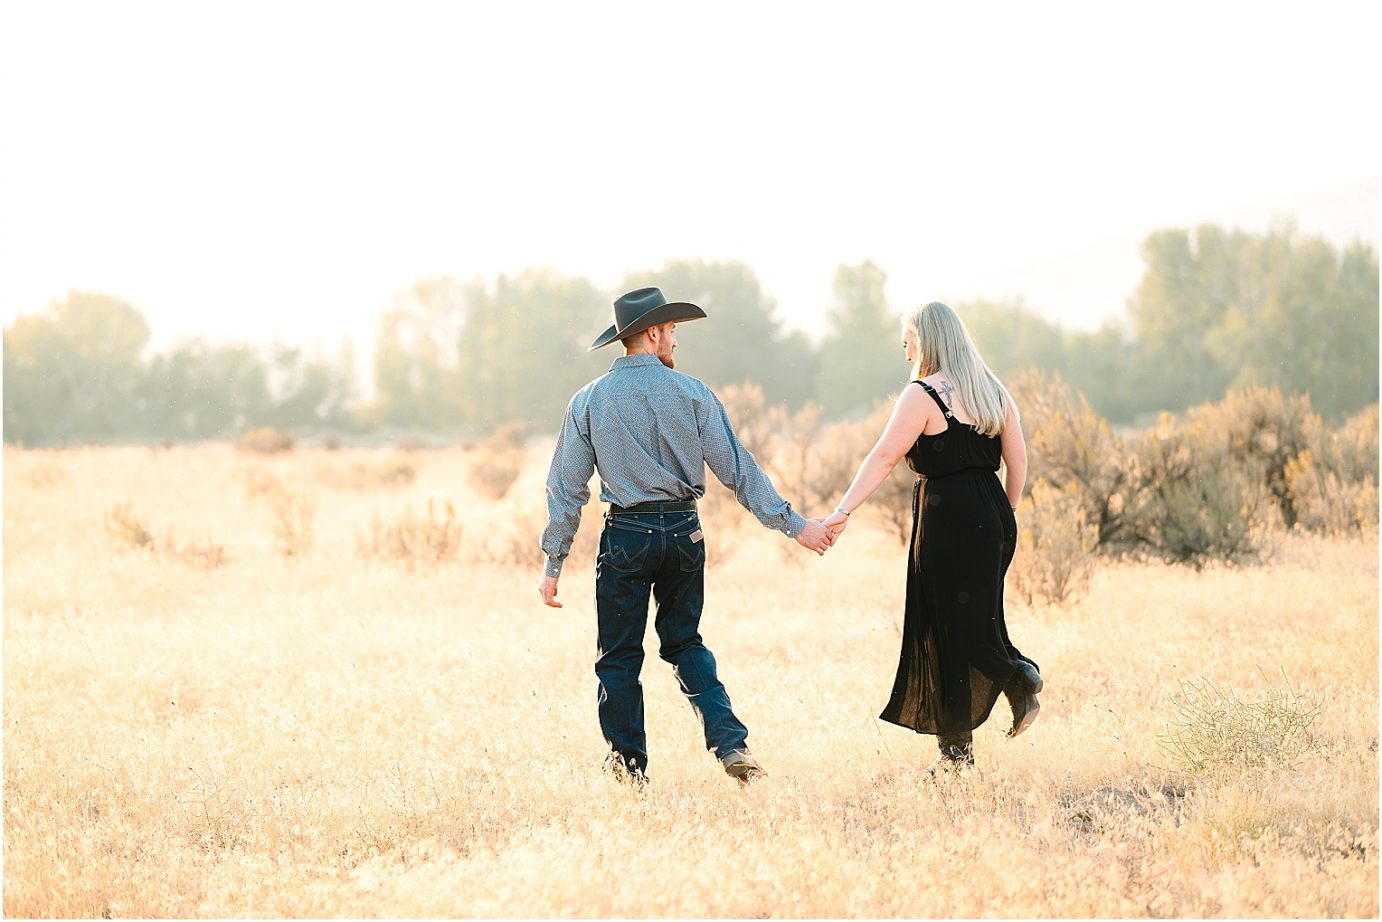 Engagement session in the desert Central WA Andrew and Shelby couple walking in a golden field